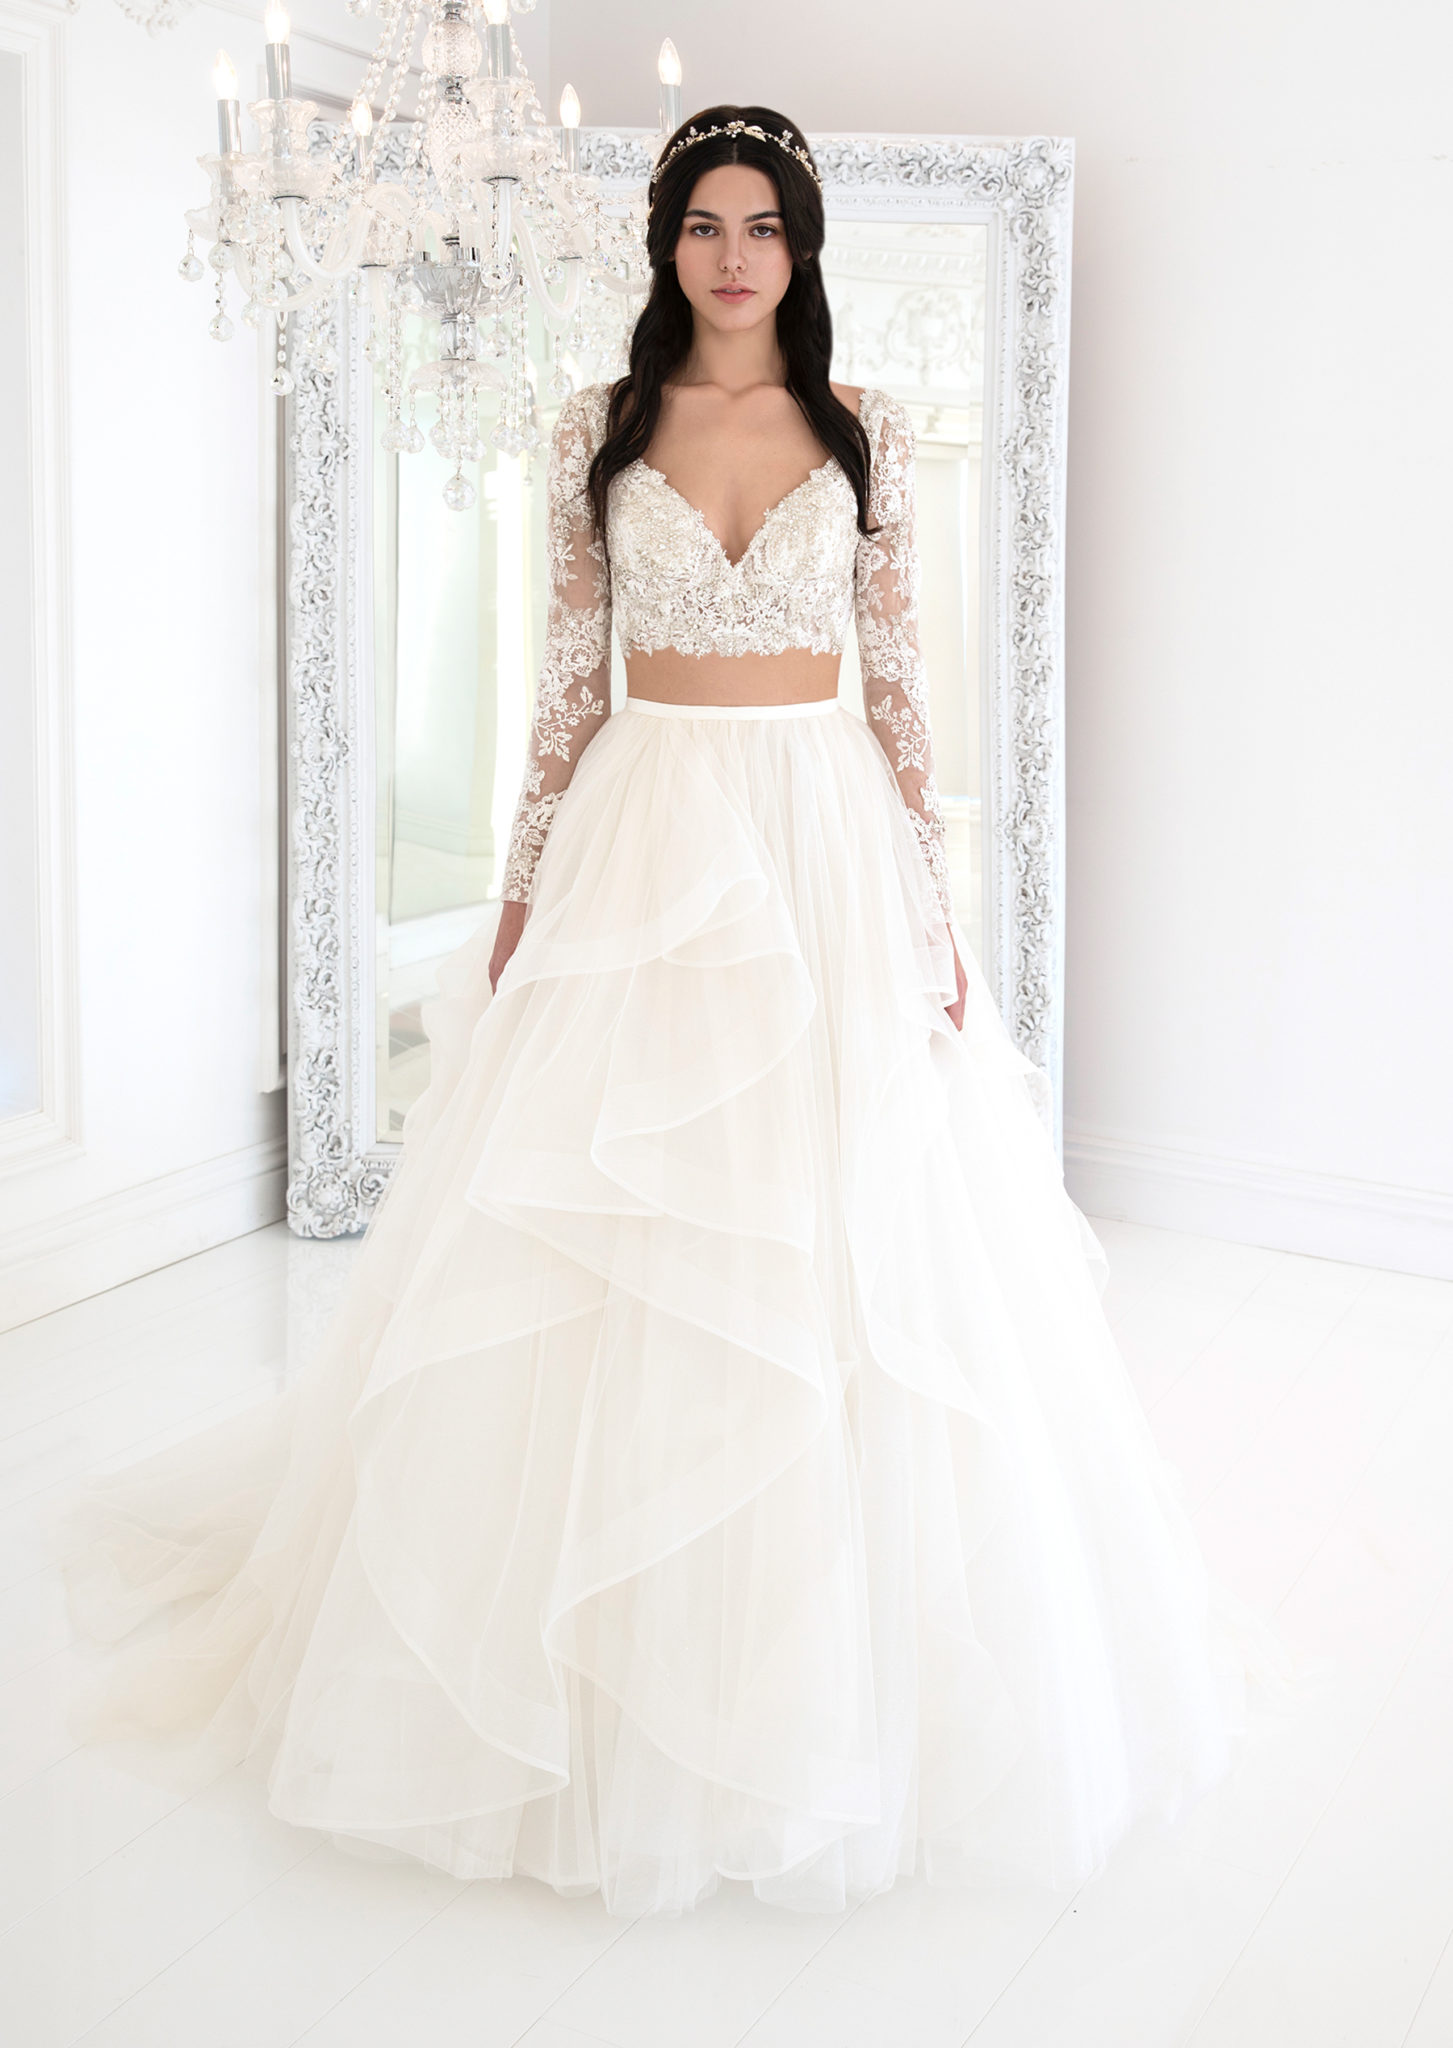 3 Incredible Lace Wedding Dresses